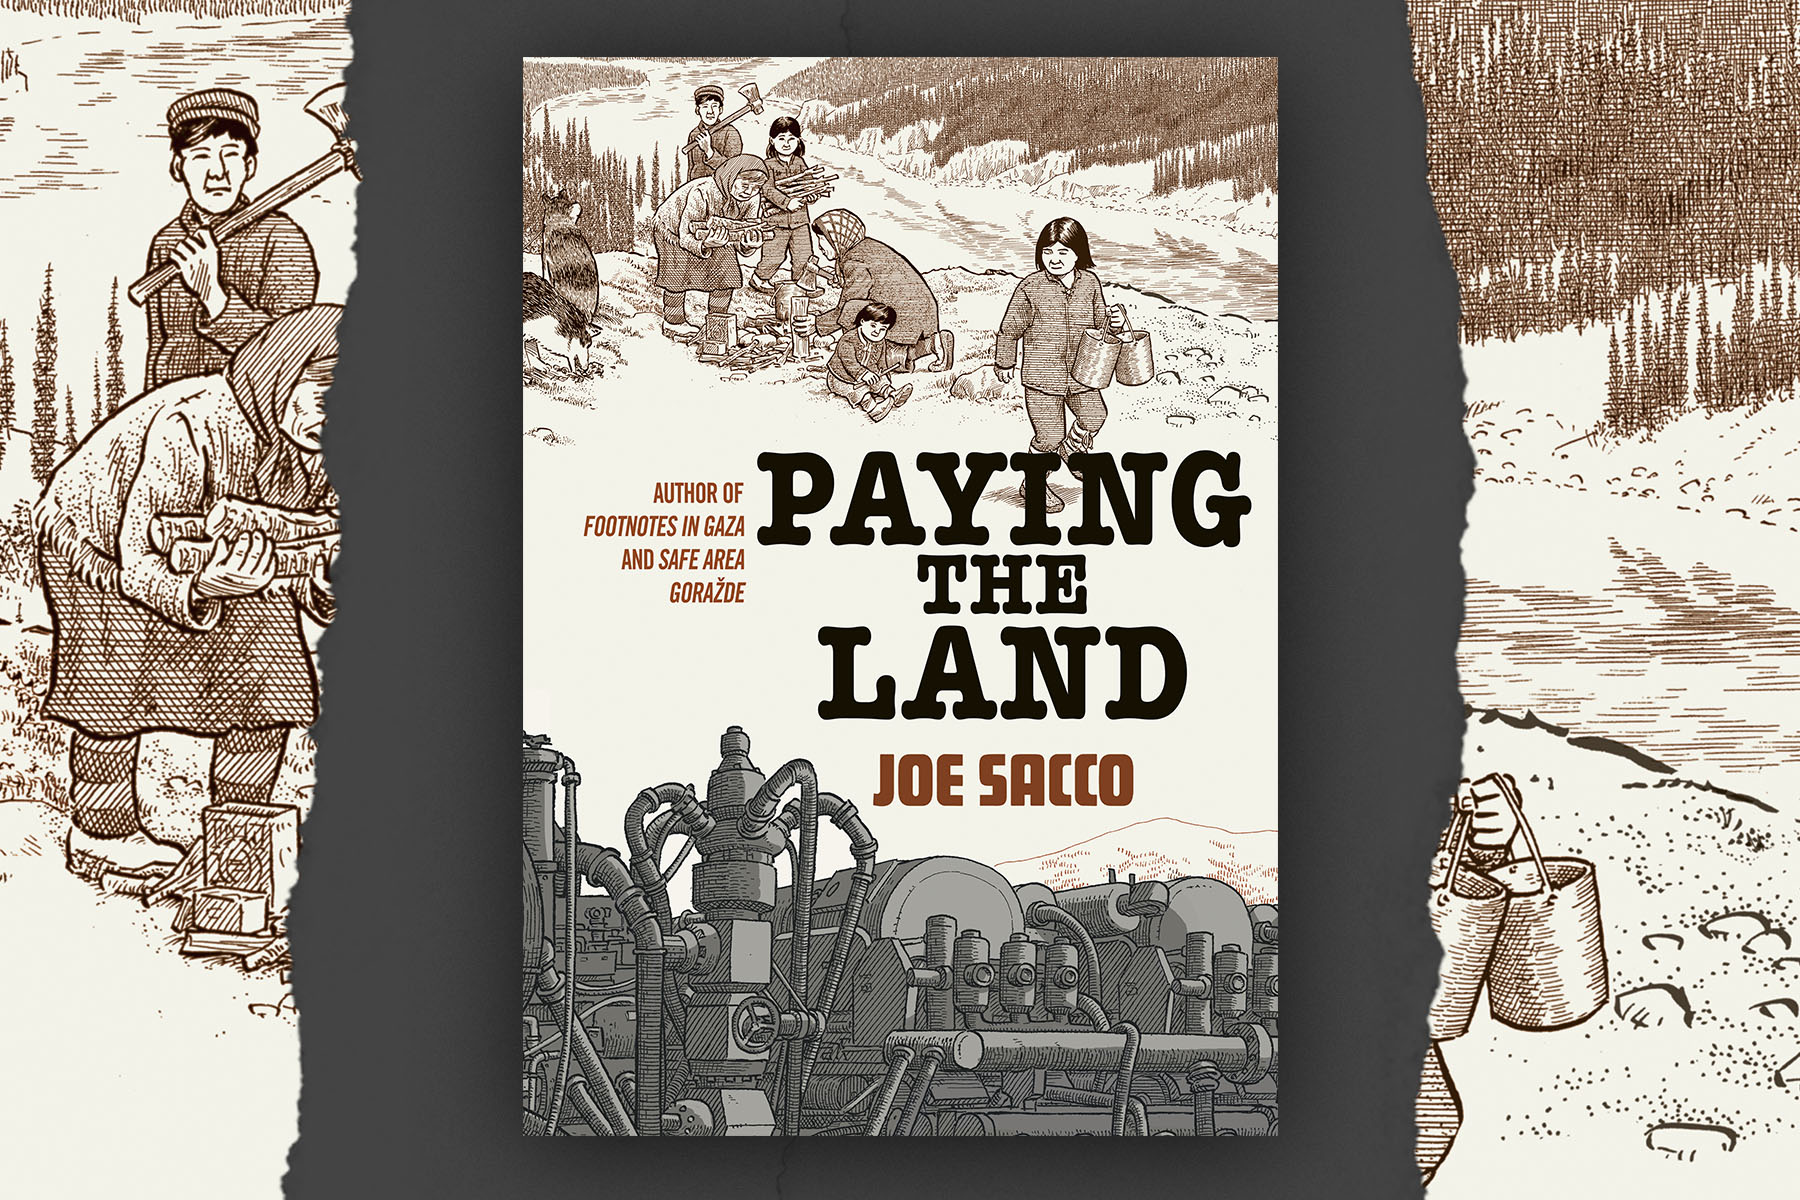 Paying the Land by Joe Sacco extract.